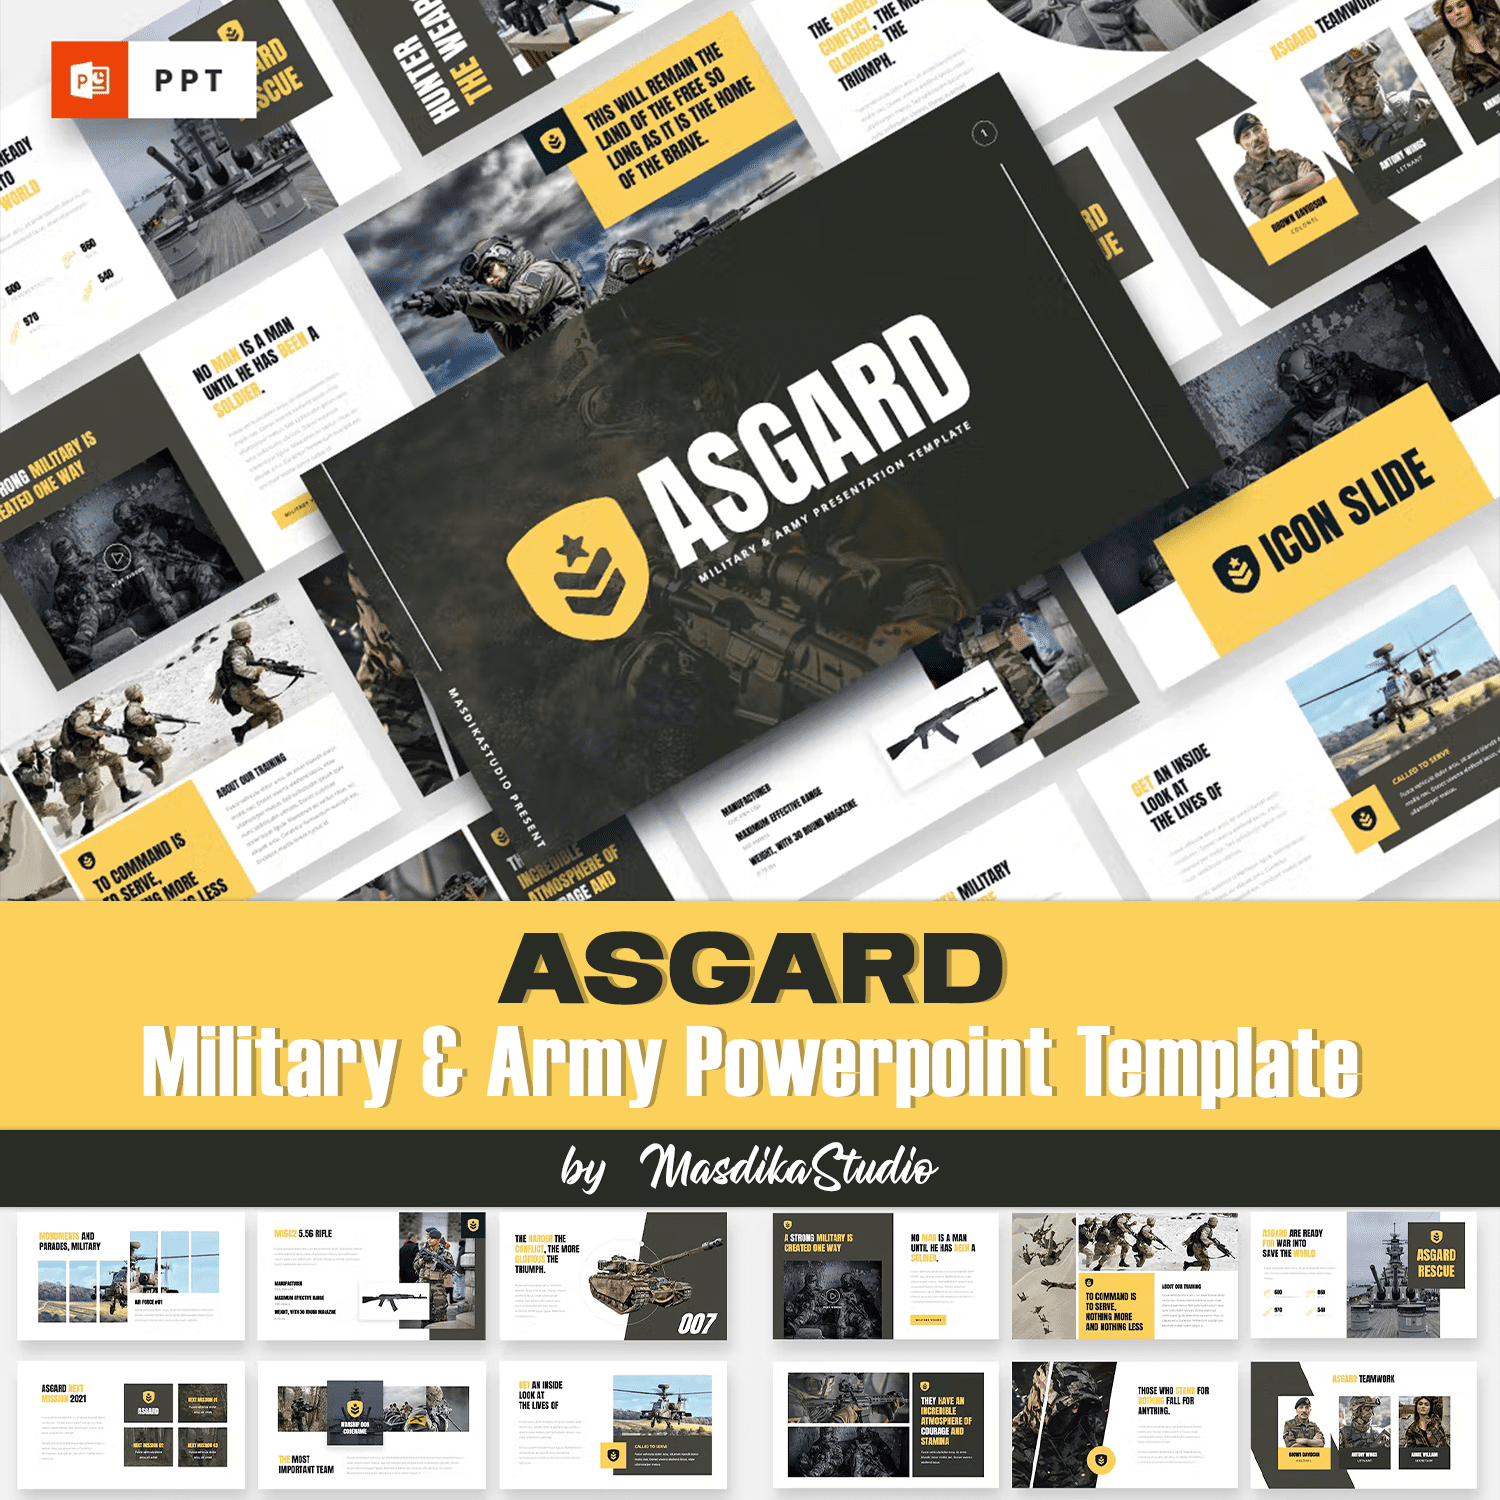 Asgard - Military and Army Powerpoint Template.